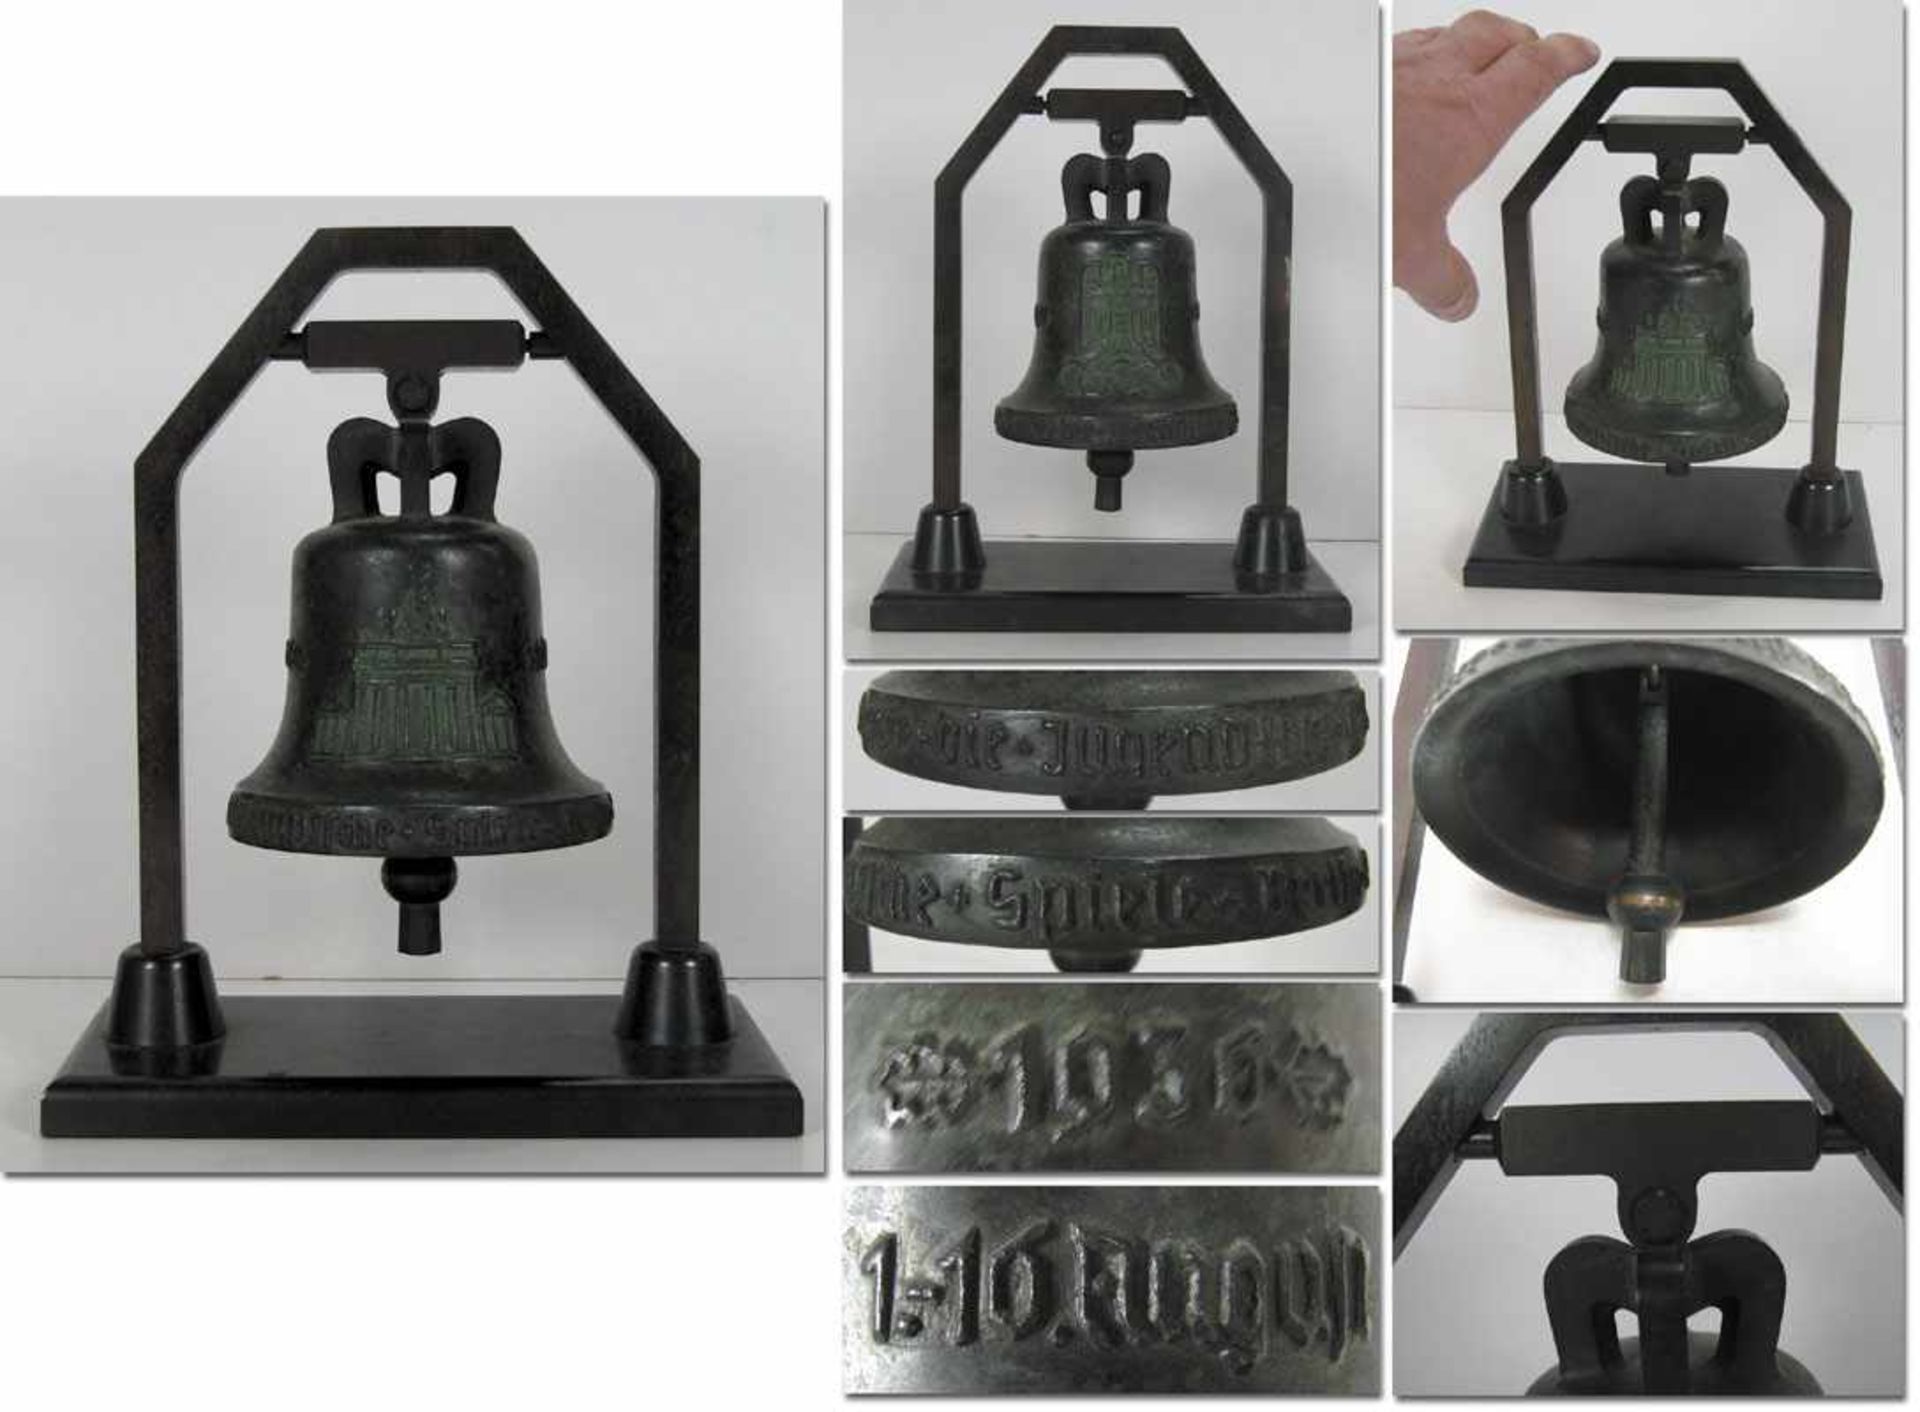 Olympic Games Berlin 1936. Bronze Bell - Bronze cast modelled from the original in the Olympic Tower